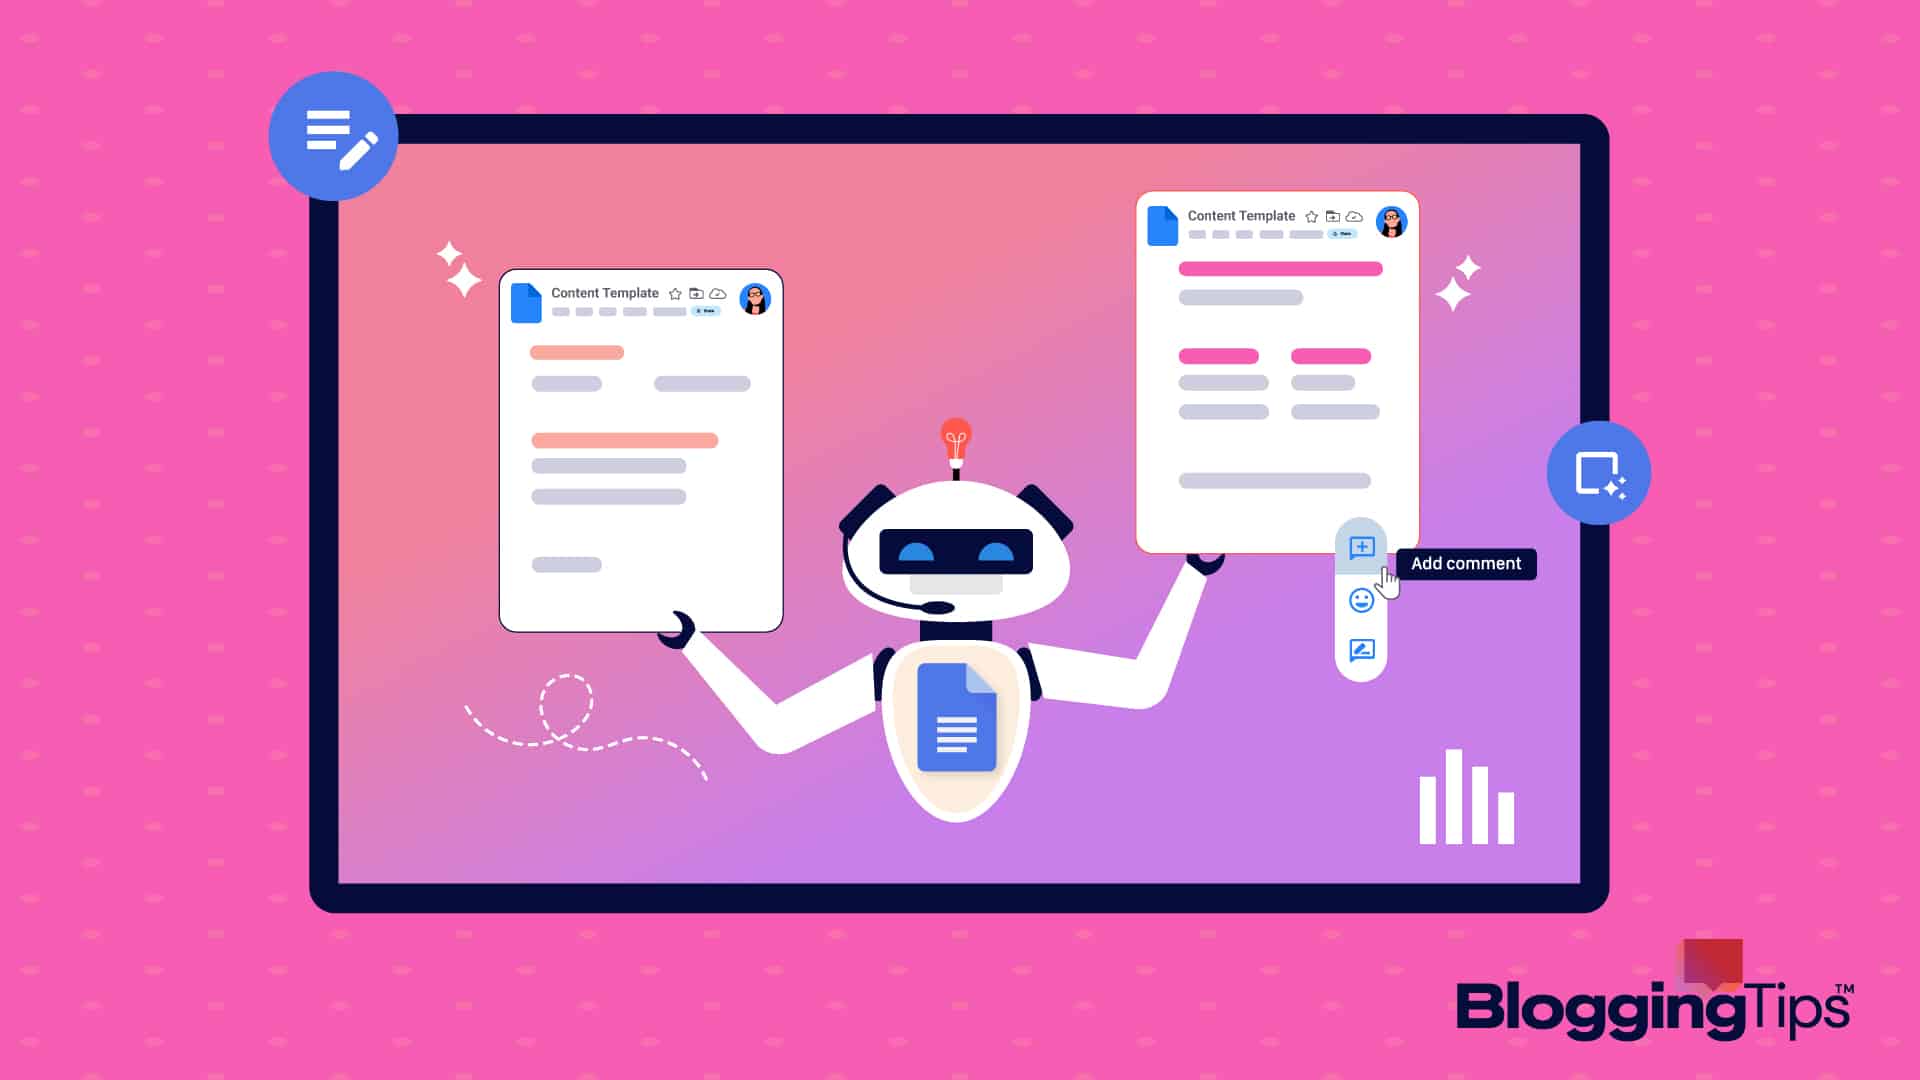 vector graphic showing an illustration of a robot showing website content template google docs